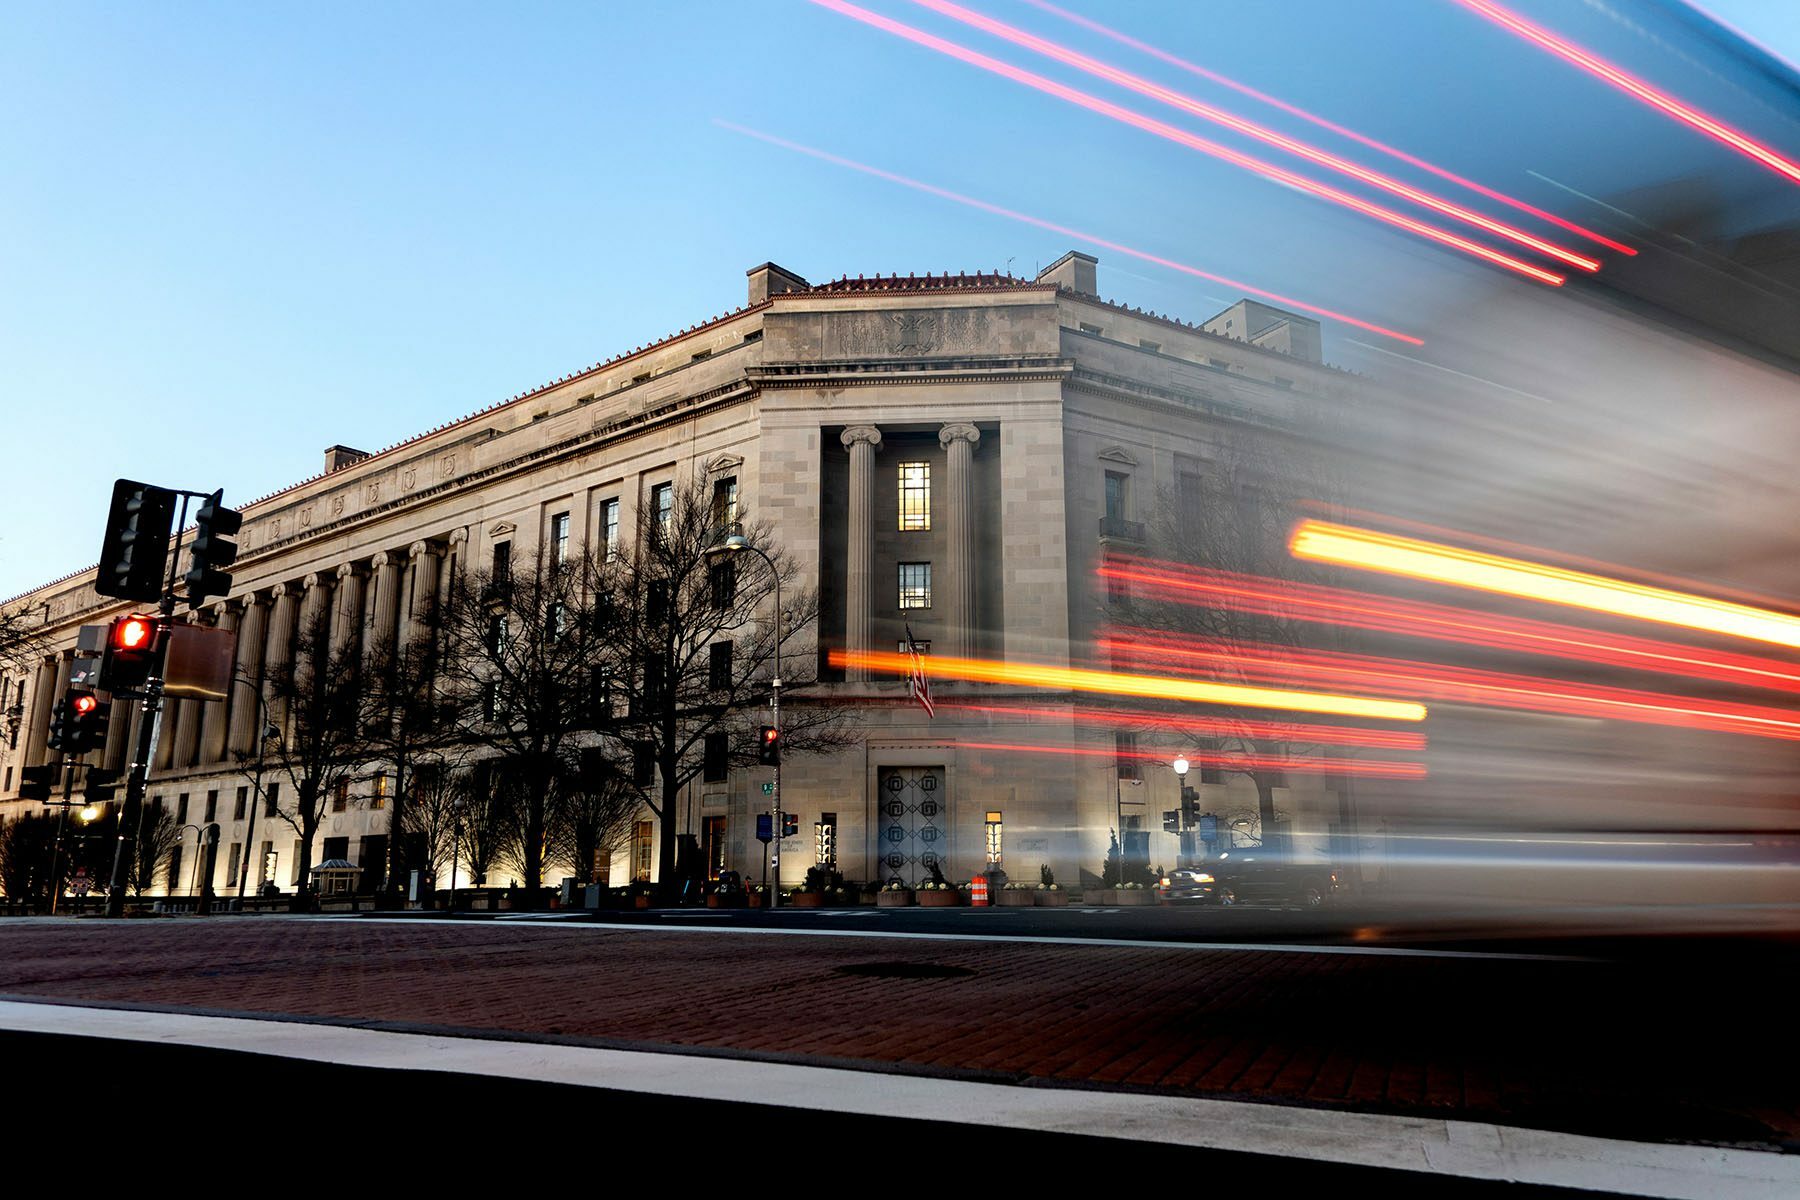 A vehicle drives past the Department of Justice building in Washington, D.C.